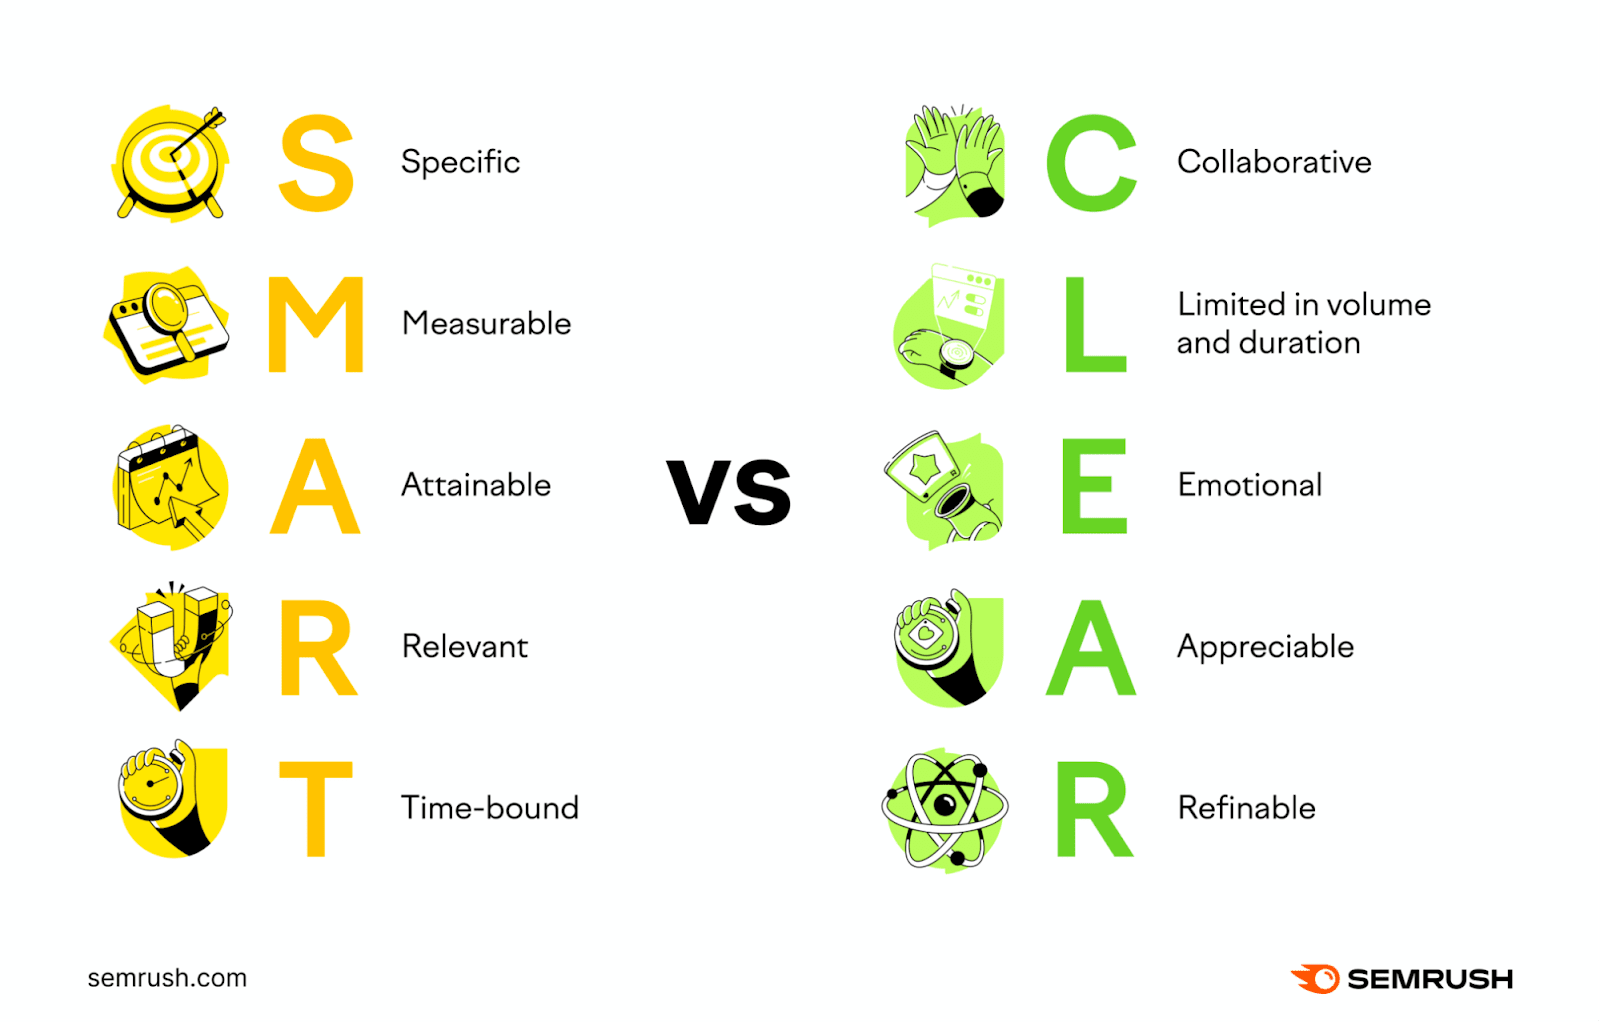 Semrush's infographic comparing the difference between "SMART" and "CLEAR" goals